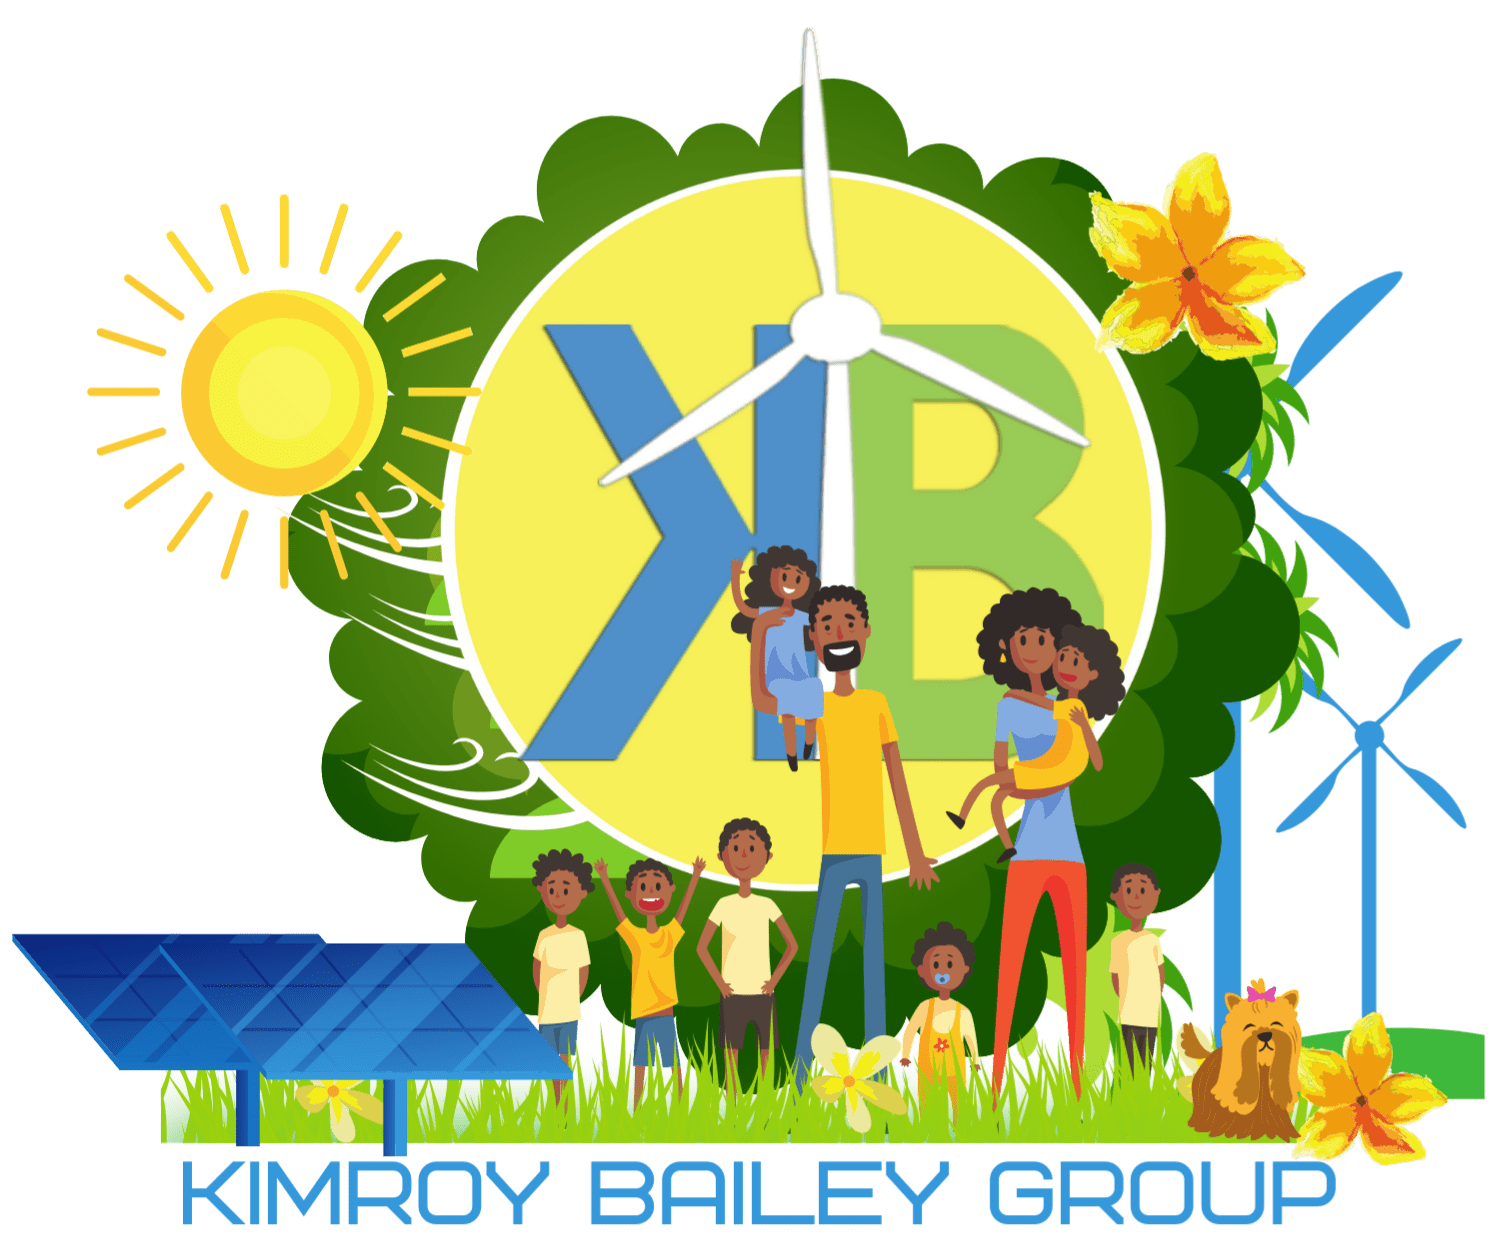 Kimroy-Bailey-Group-of-Companies-Logo with Kimroy Bailey, Sher Trott Bailey, Keilah and her brothers and sisters to come